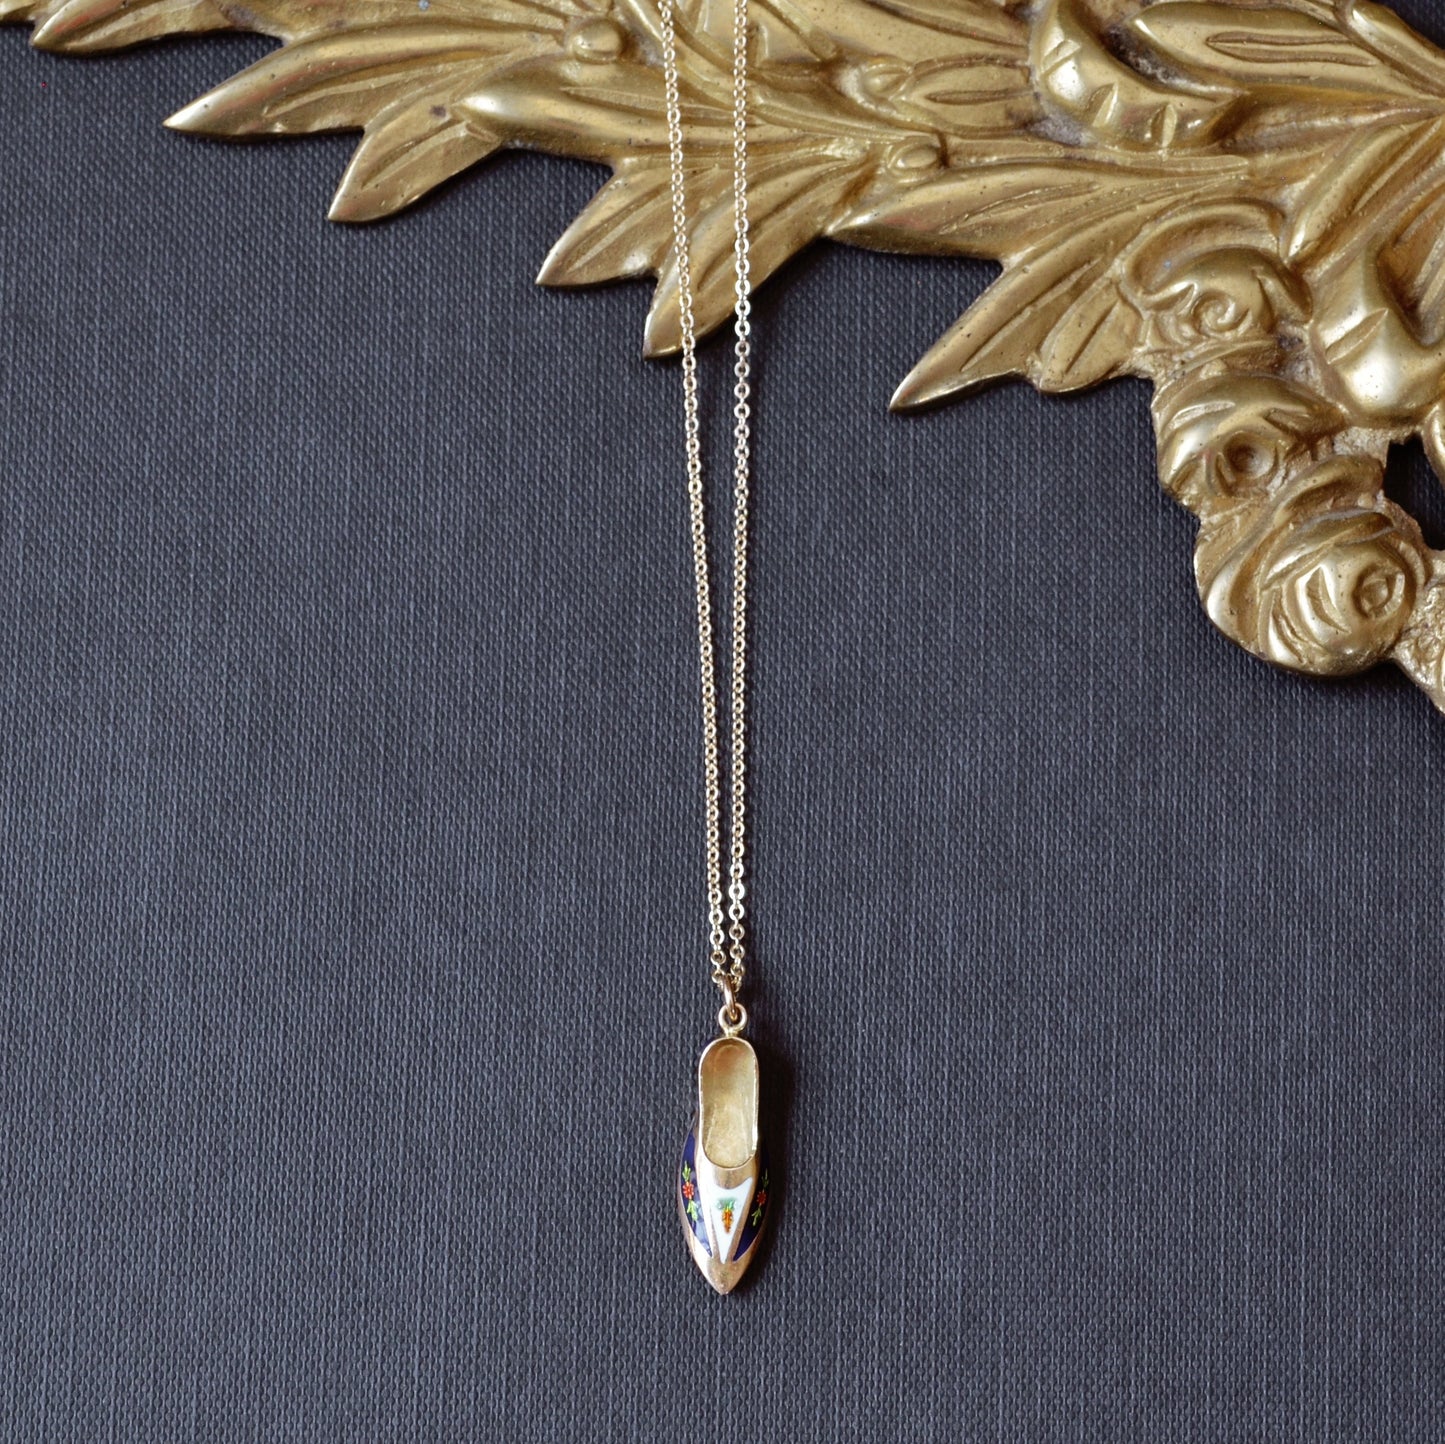 Enamel and Gold Slipper Necklace